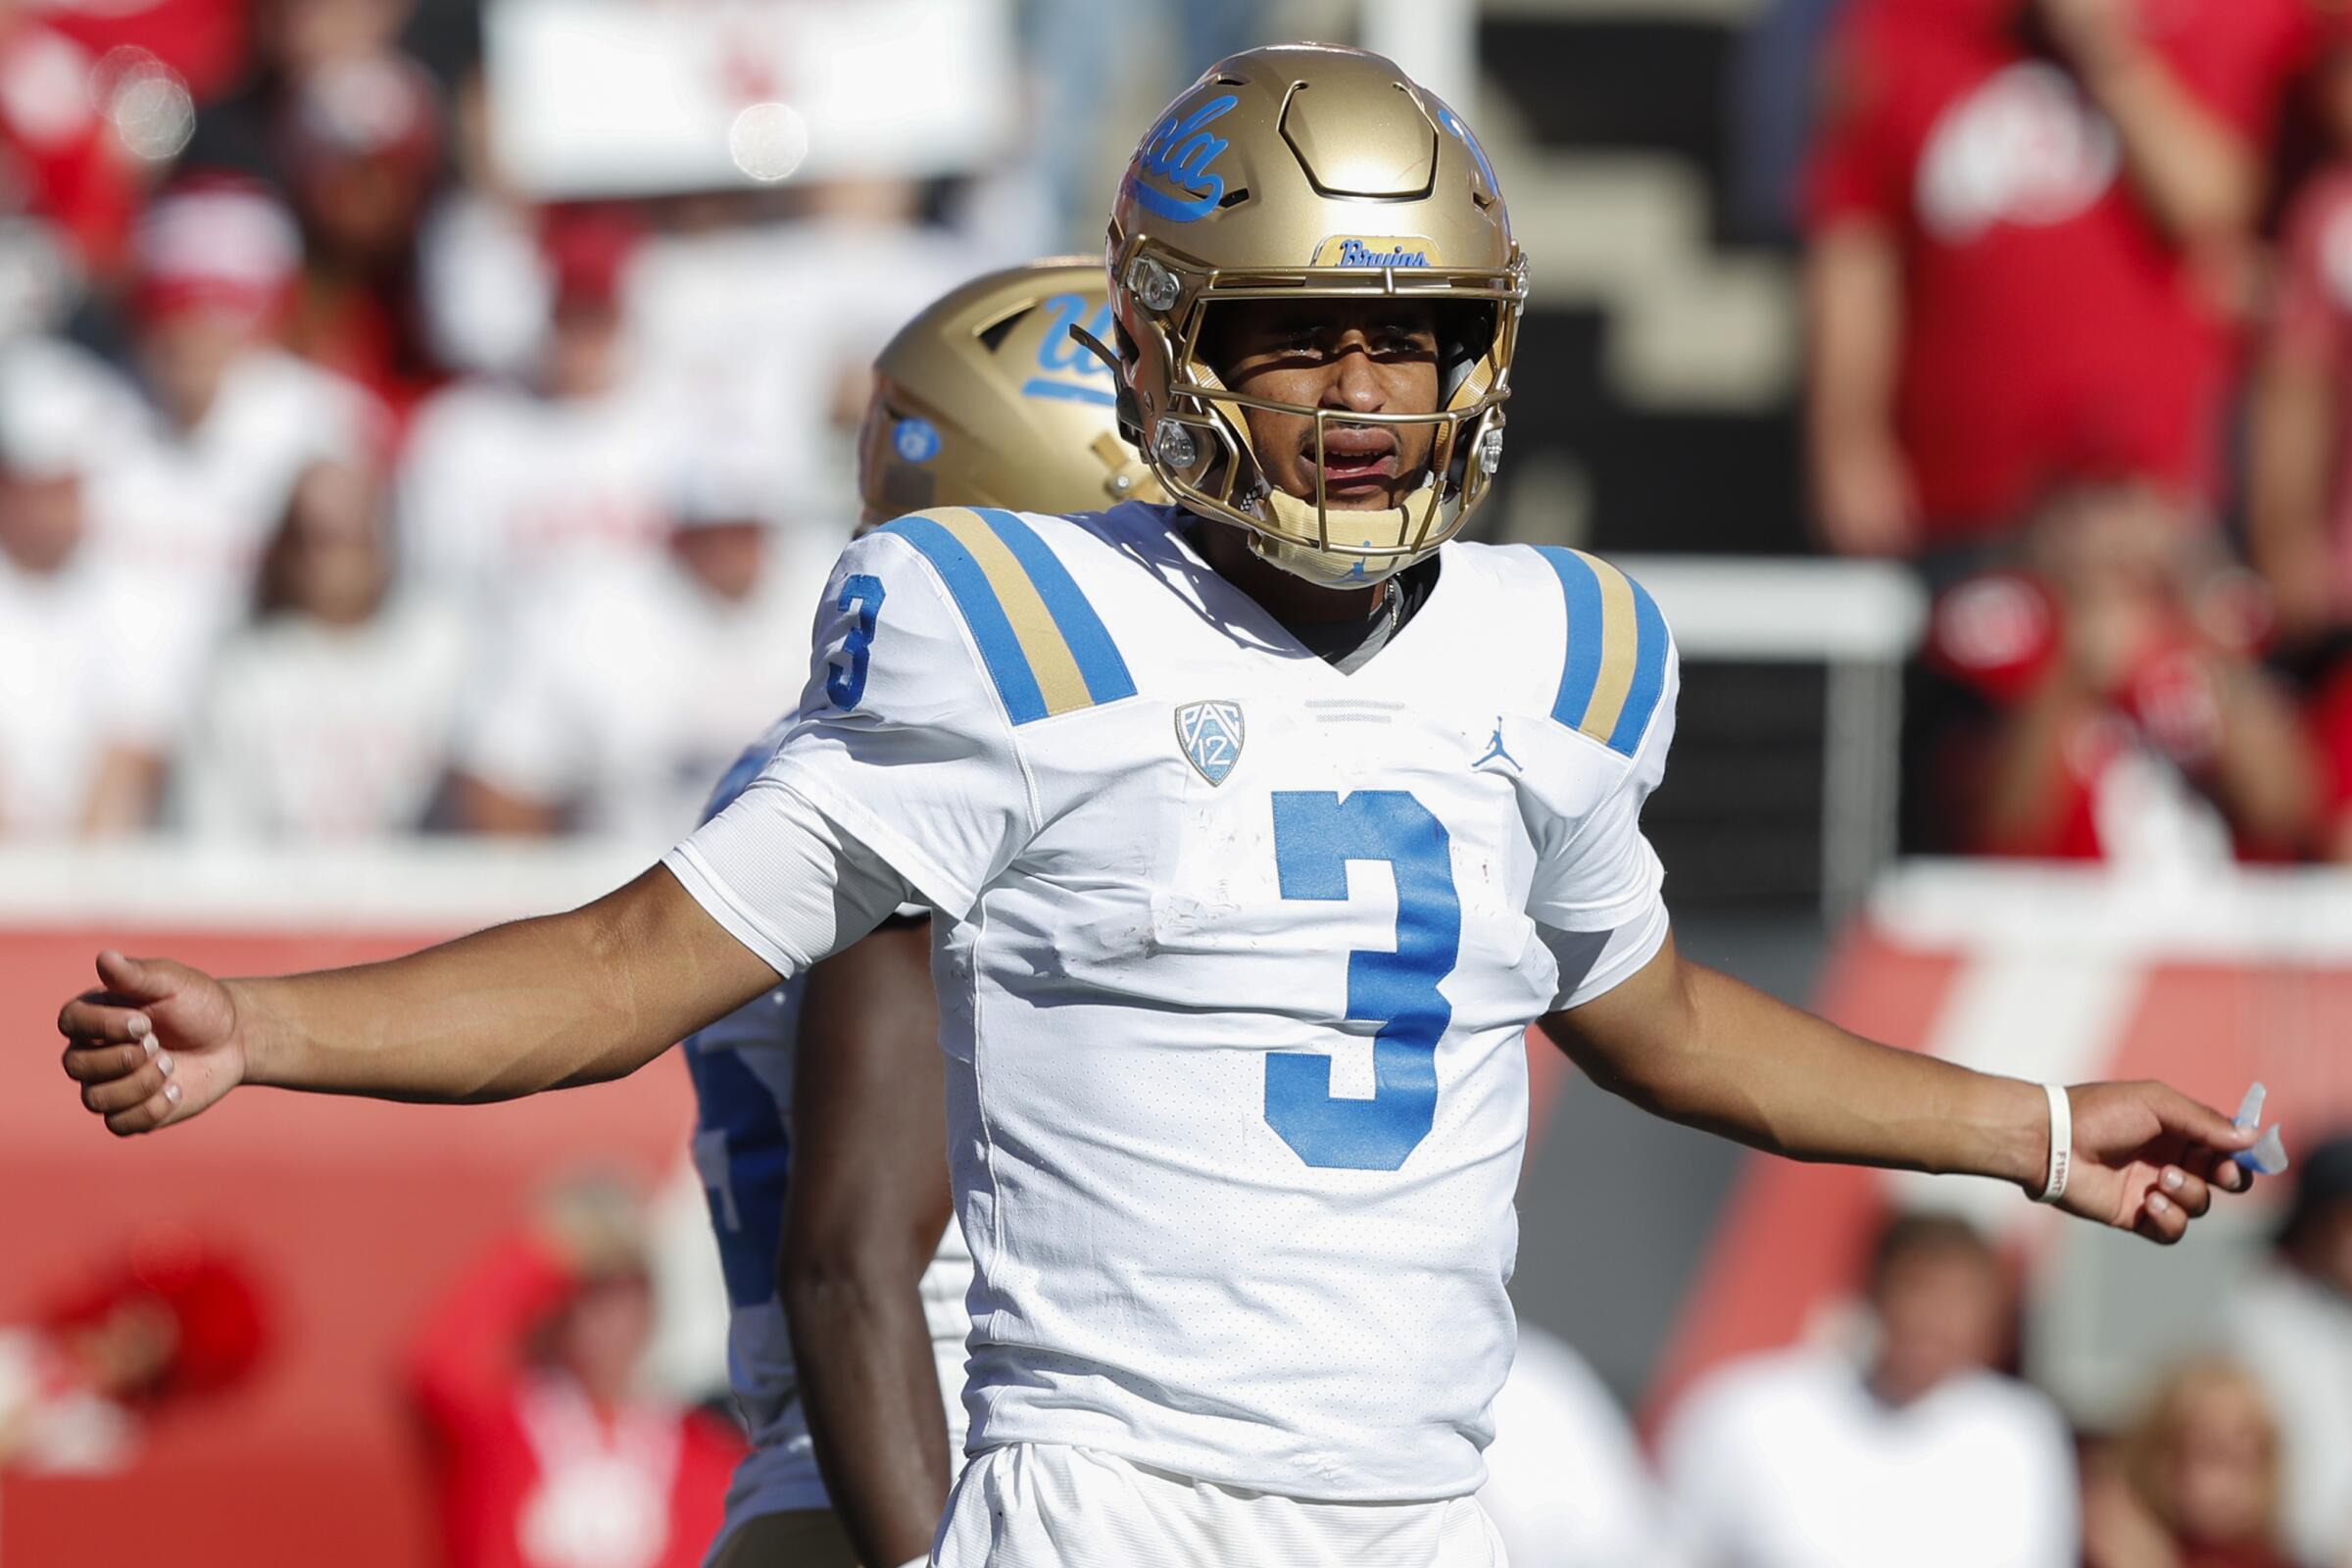 UCLA quarterback Dante Moore waits for a play call during the Bruins' 14-7 loss to Utah at Rice-Eccles Stadium.